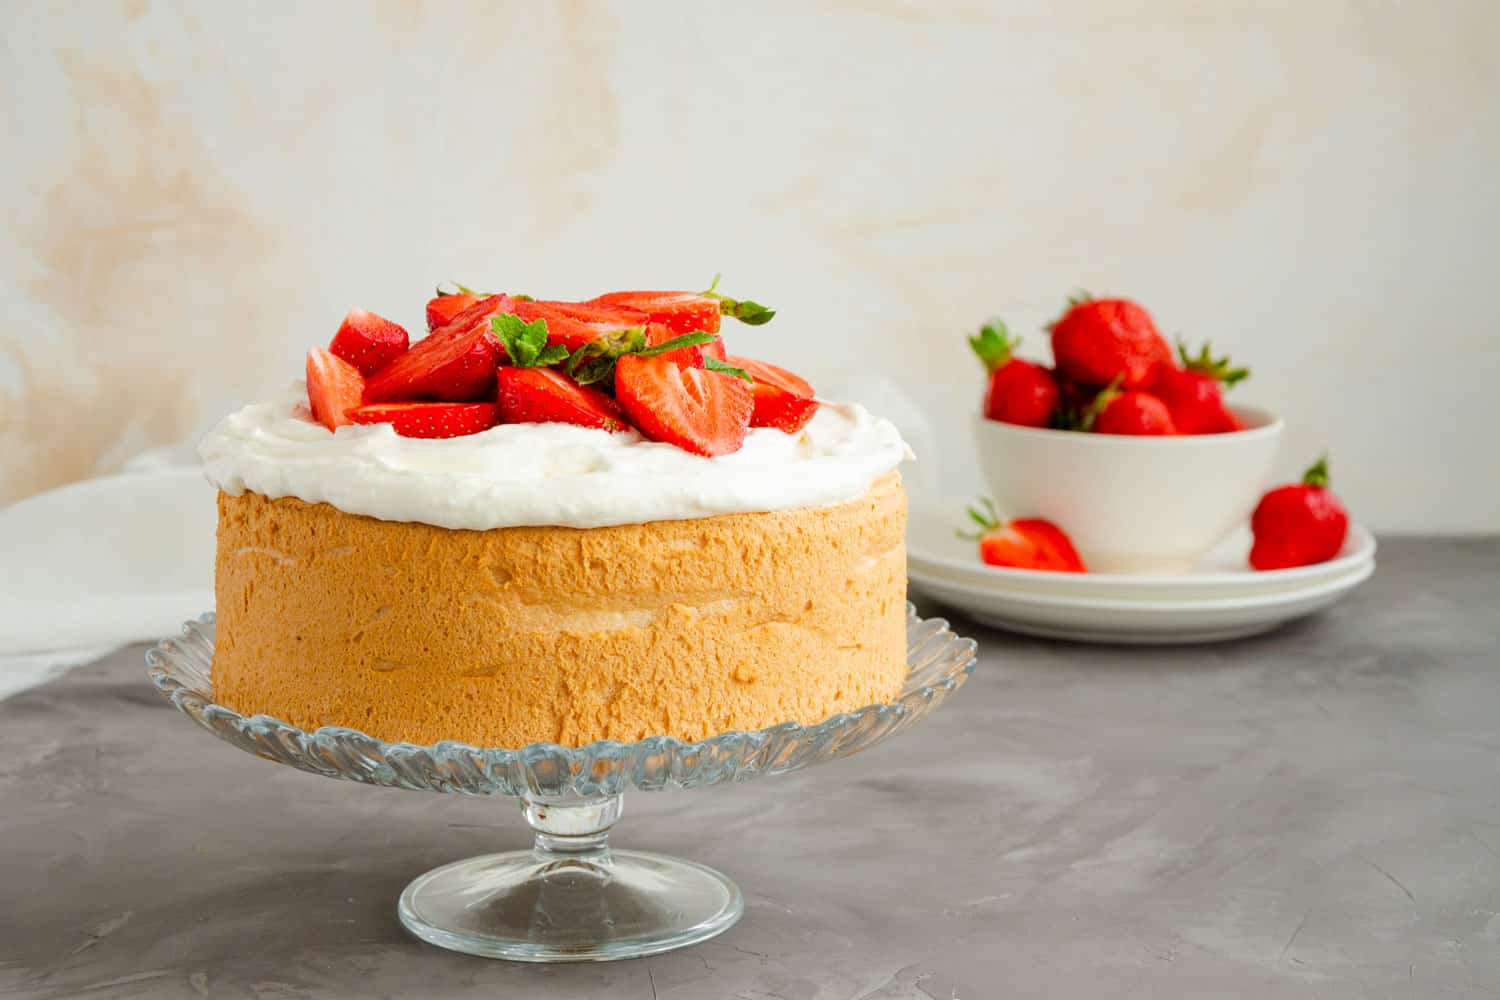 Angel food cake with whipped cream and slices of fresh strawberries on top on a concrete background